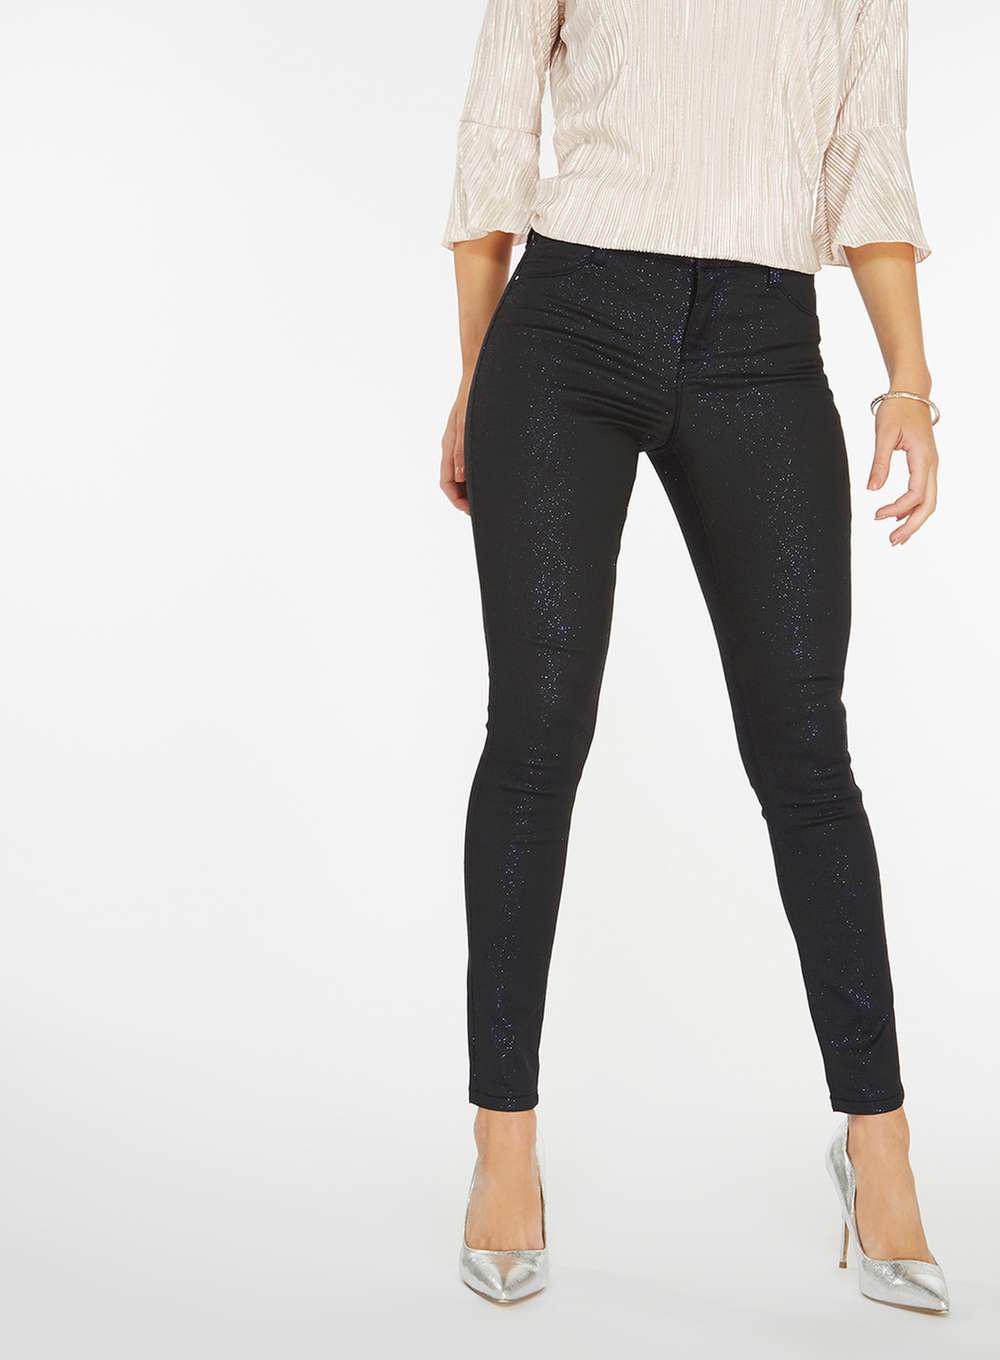 Dorothy Perkins Glitter Jeans Store, SAVE 53%.